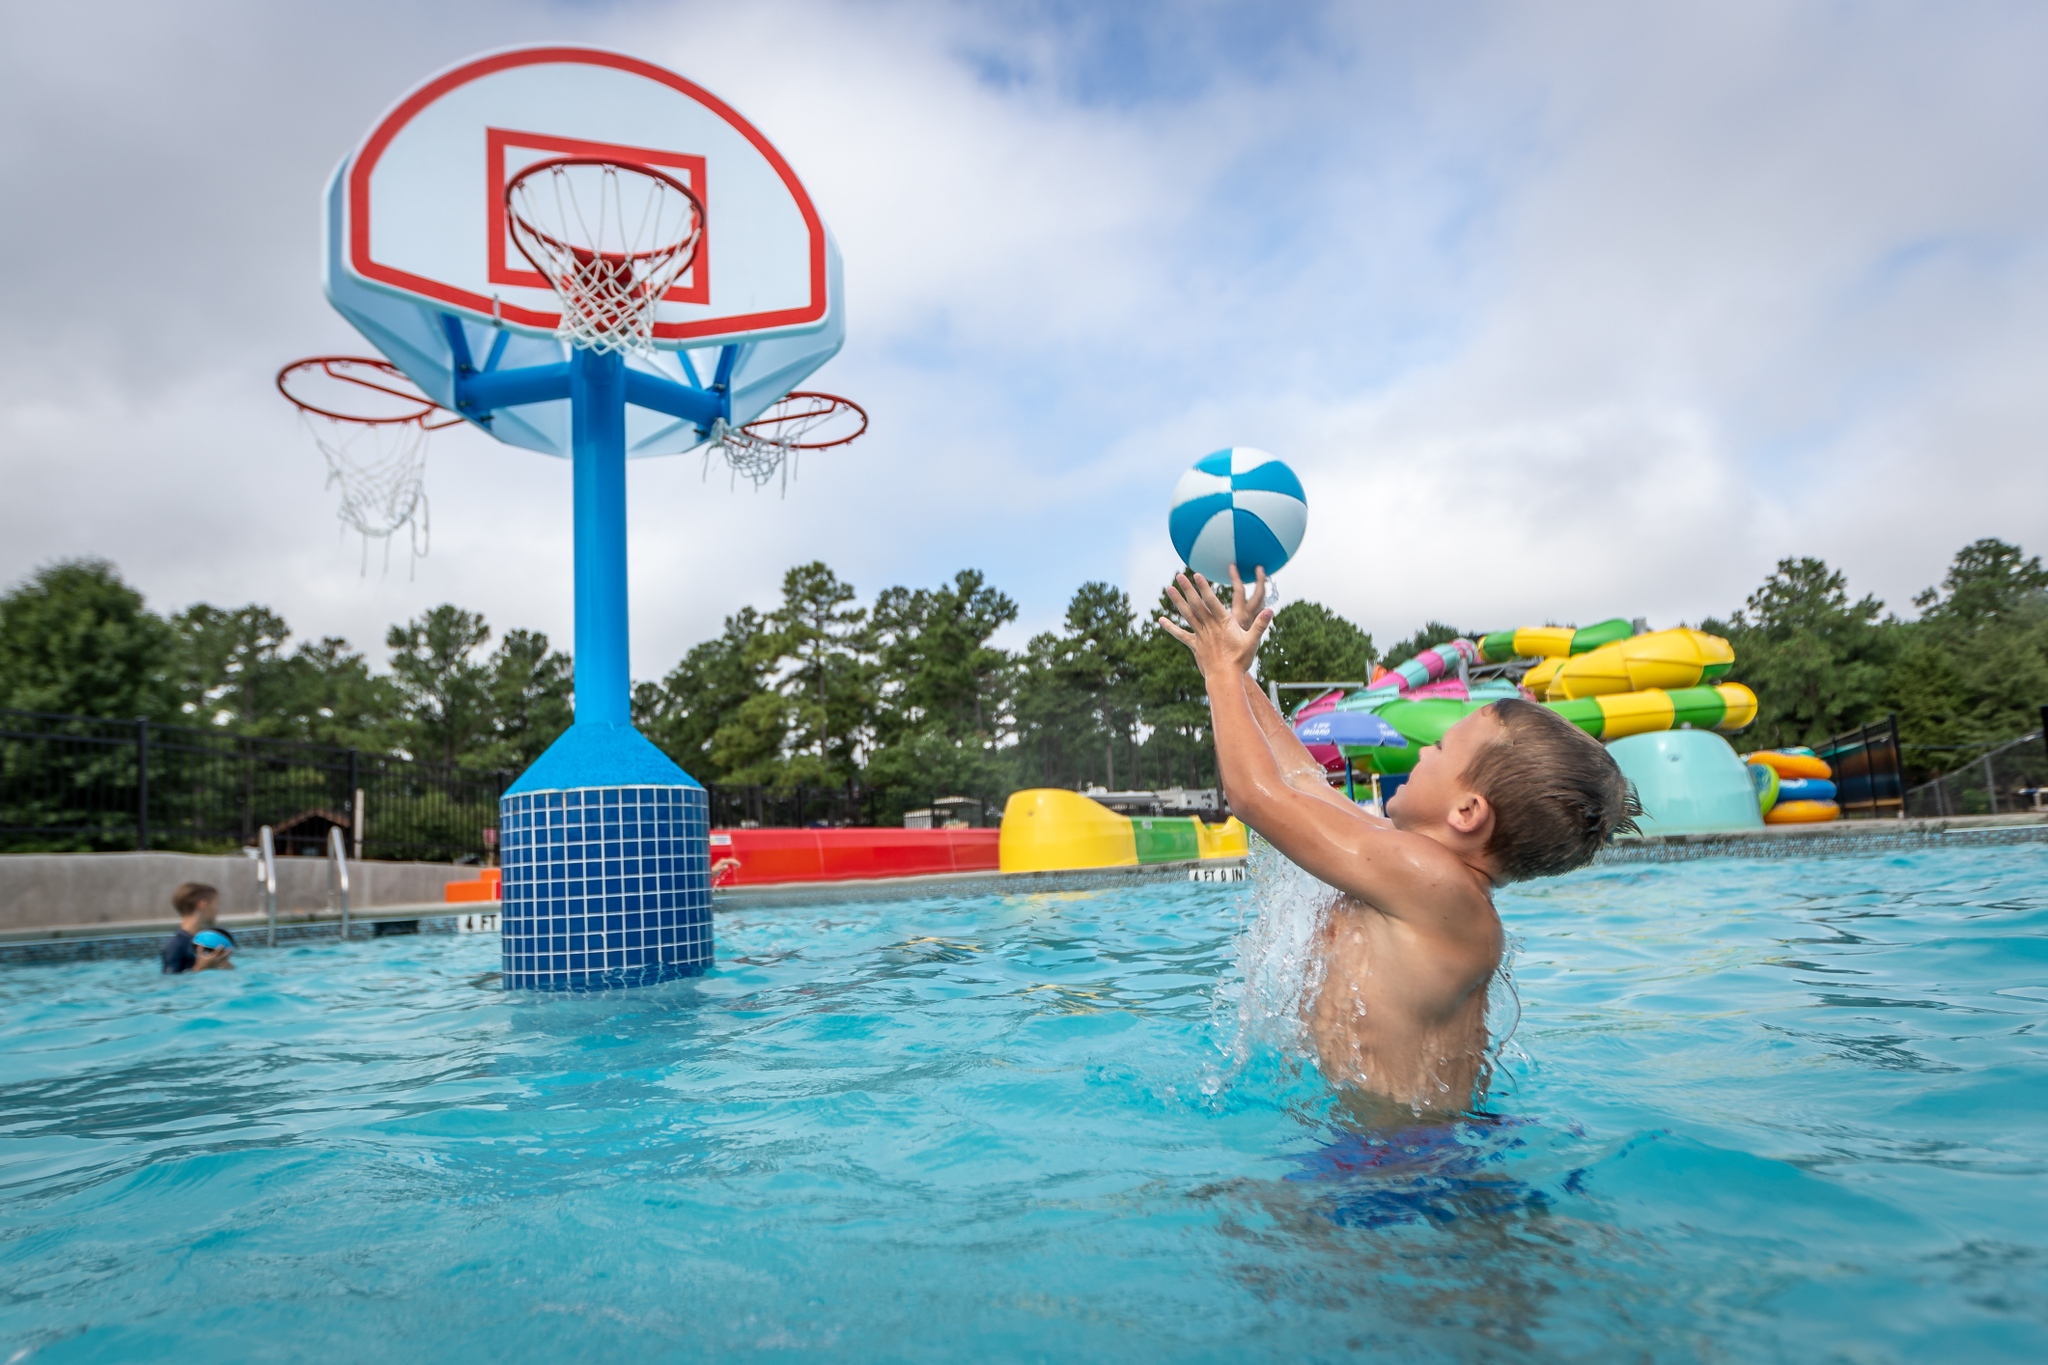 One boy playing pool basketball with our 3-Sided Custom Design Basketball Hoop